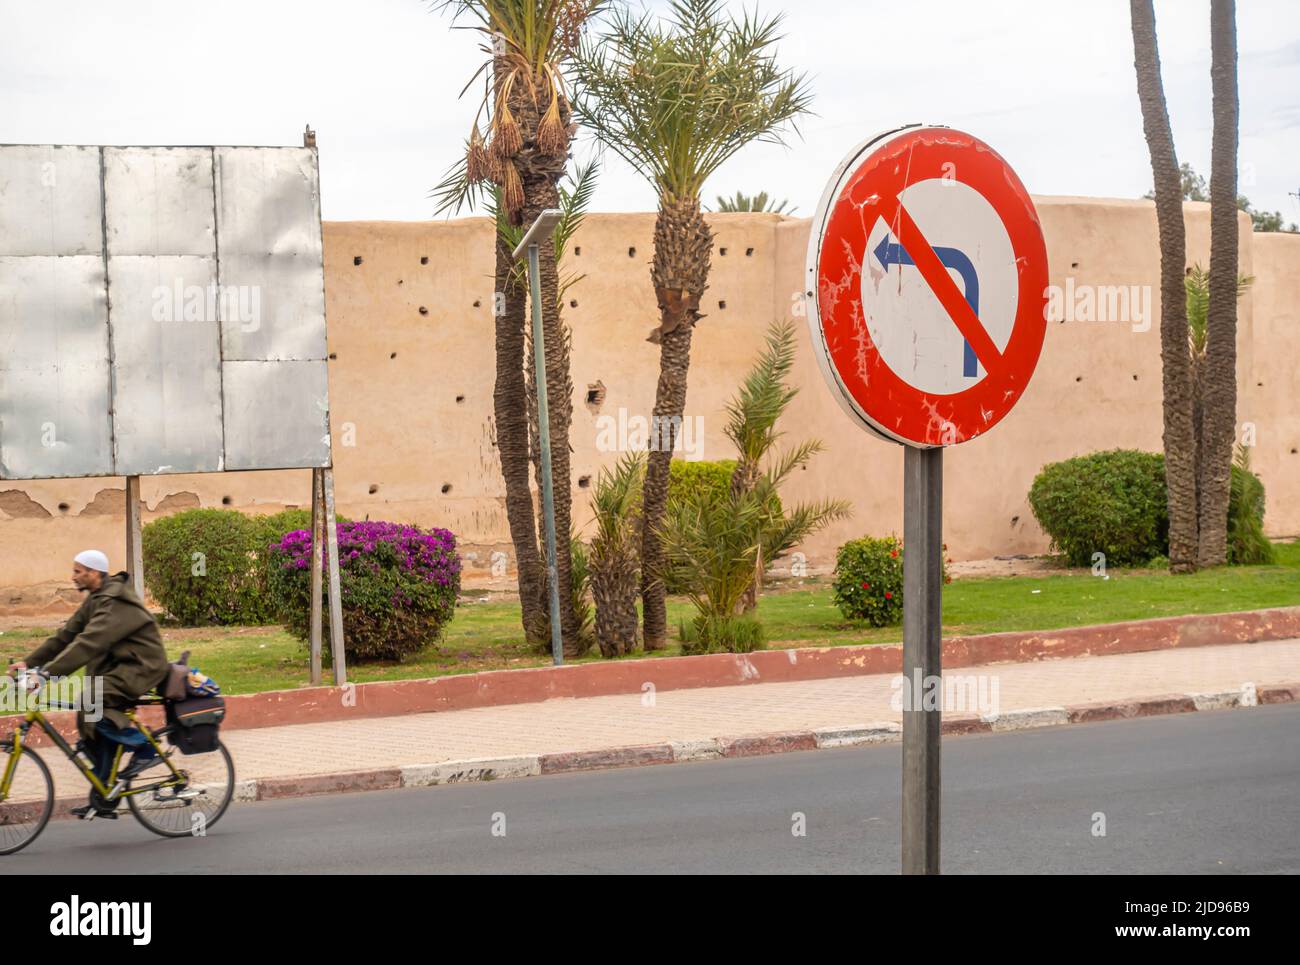 Left turn not allowed road sign street signs in Marrakech, Morocco Stock Photo